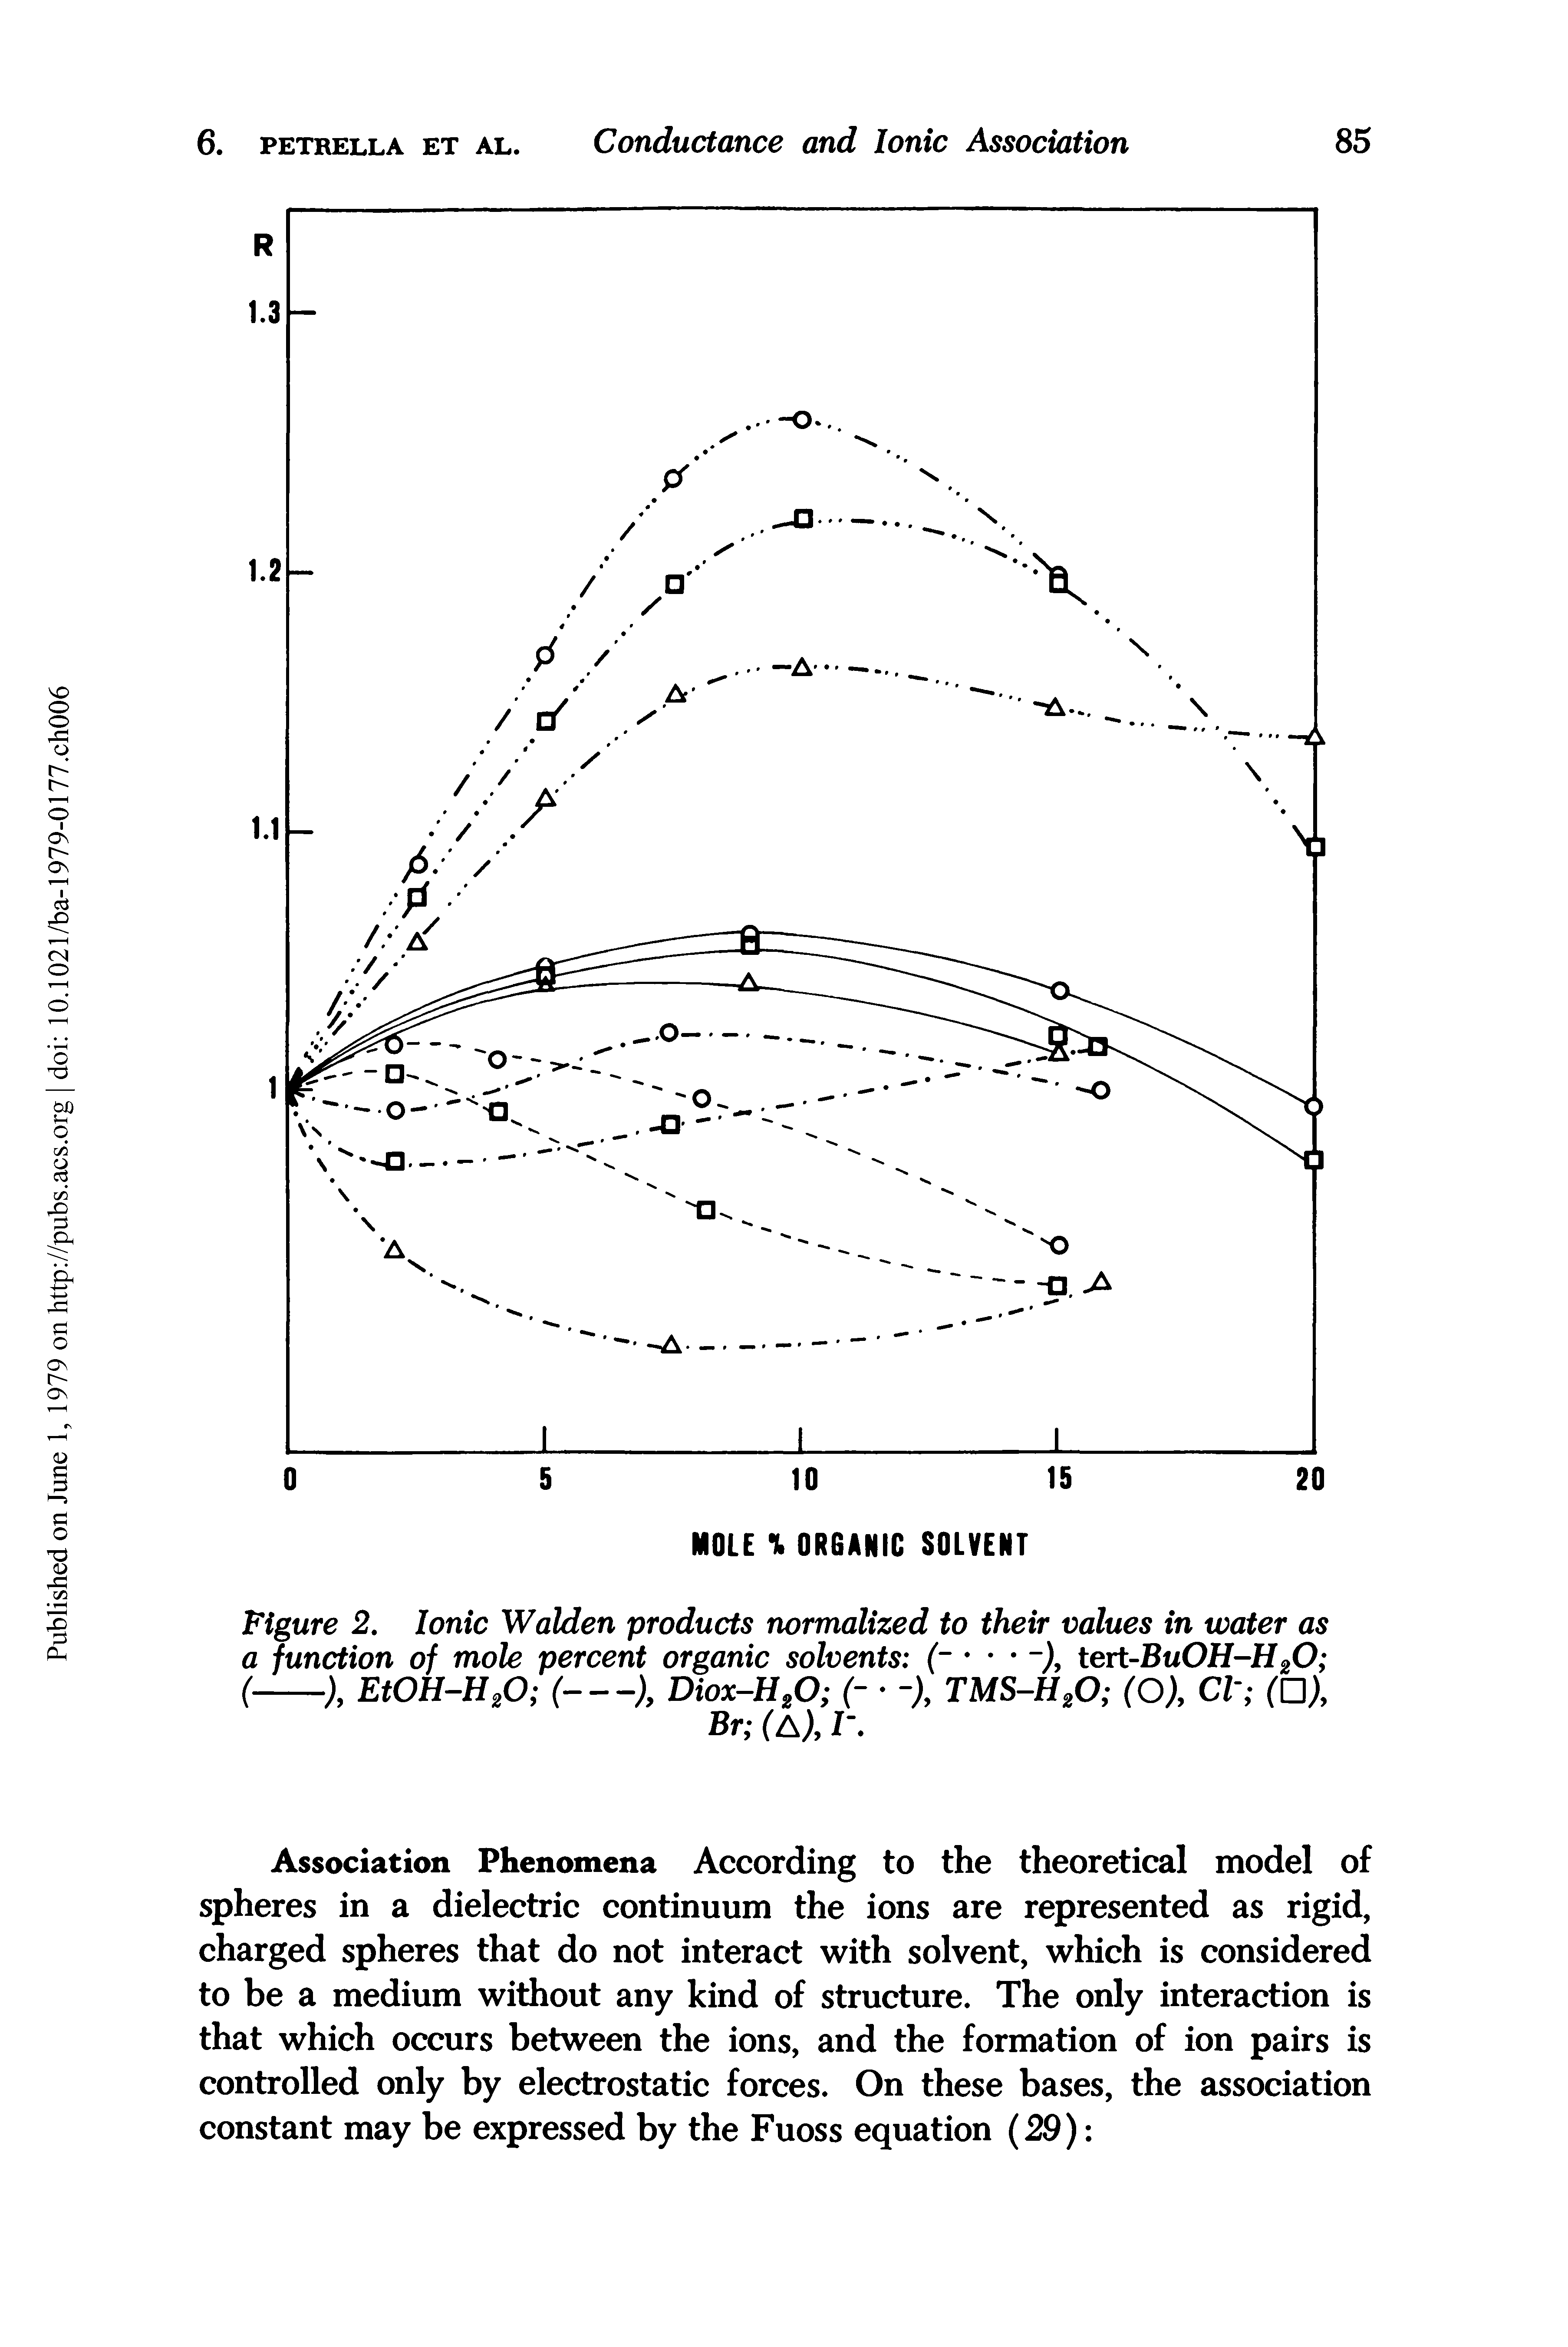 Figure 2. Ionic Walden products normalized to their values in water as a function of mole percent organic solvents (- ), tert-Bu0H-H20 ...